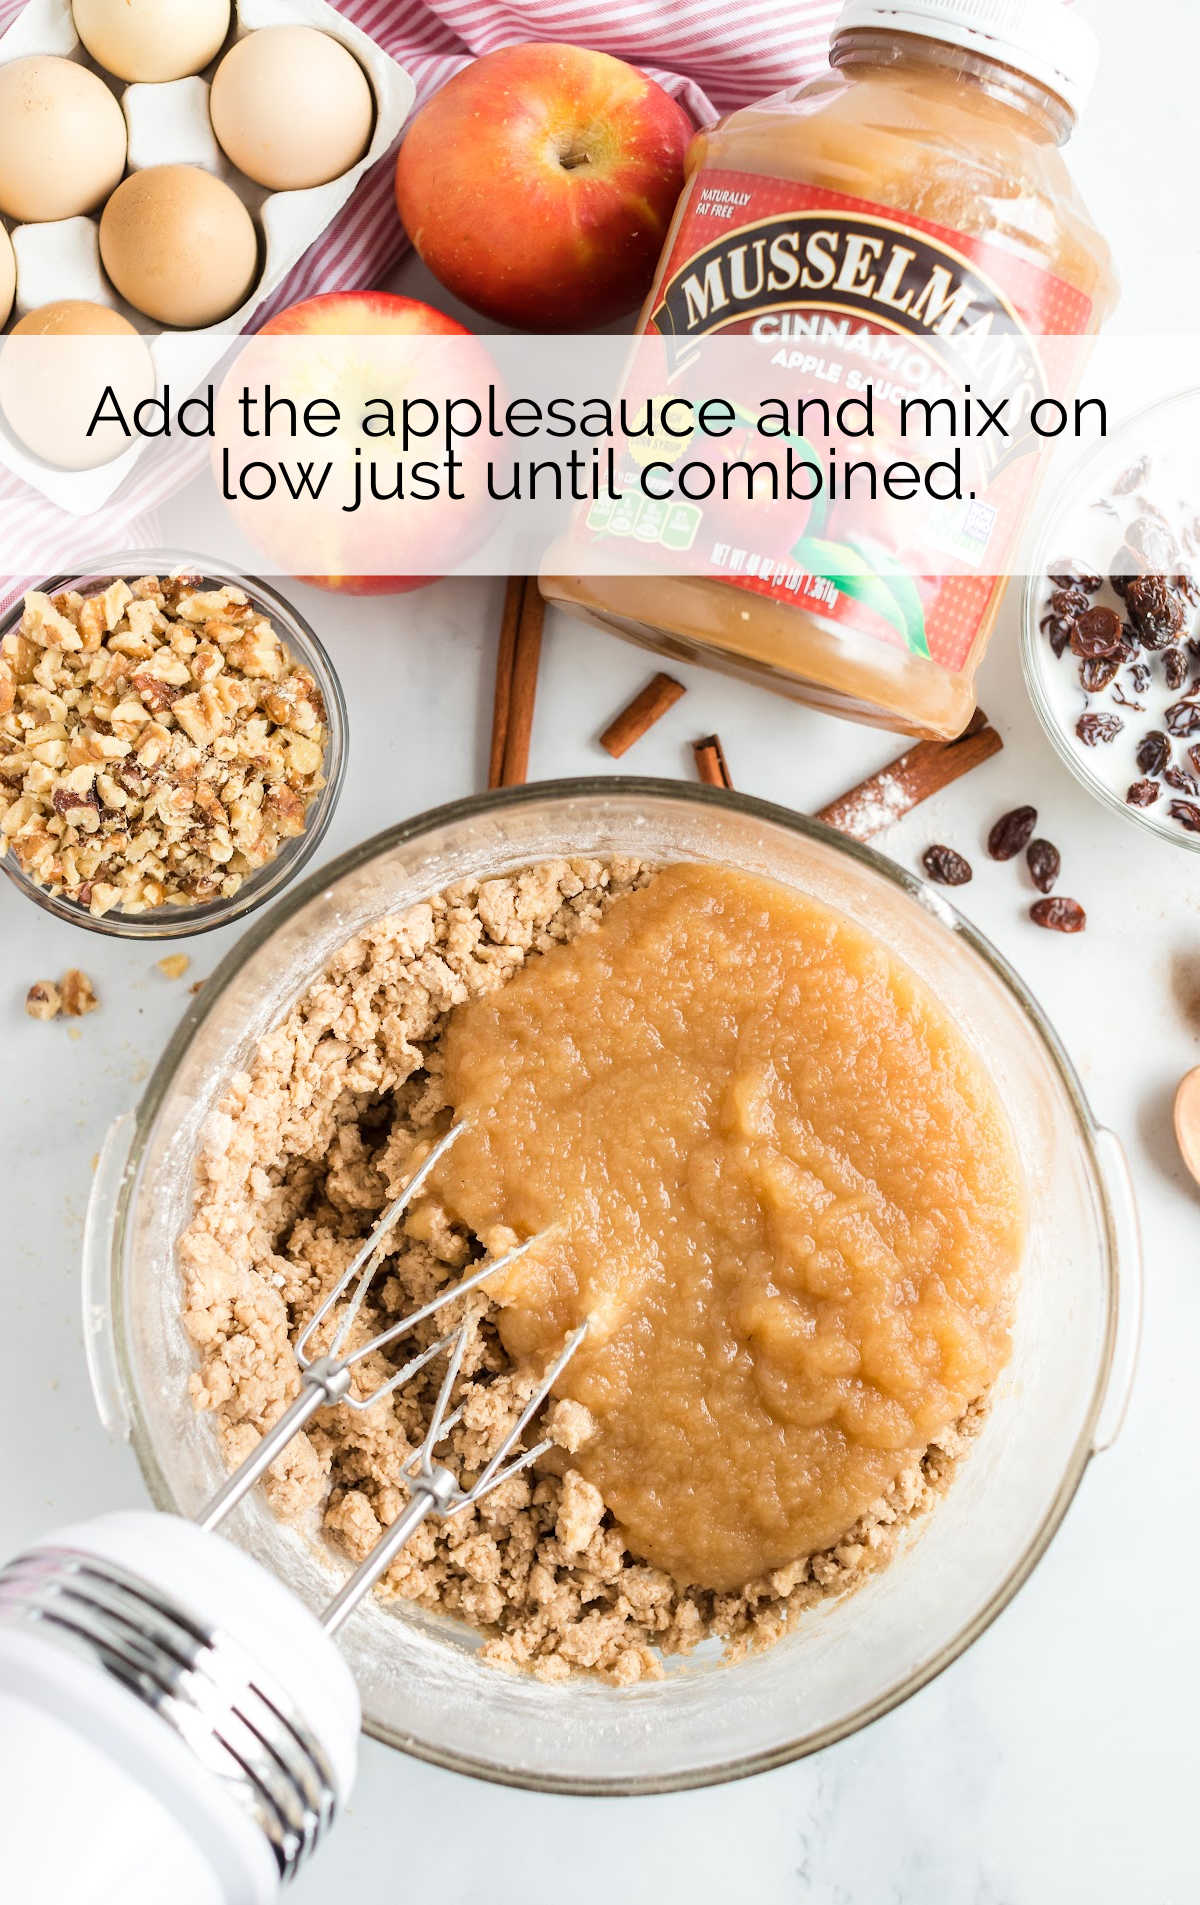 apple sauce whisked into the cake batter mixture